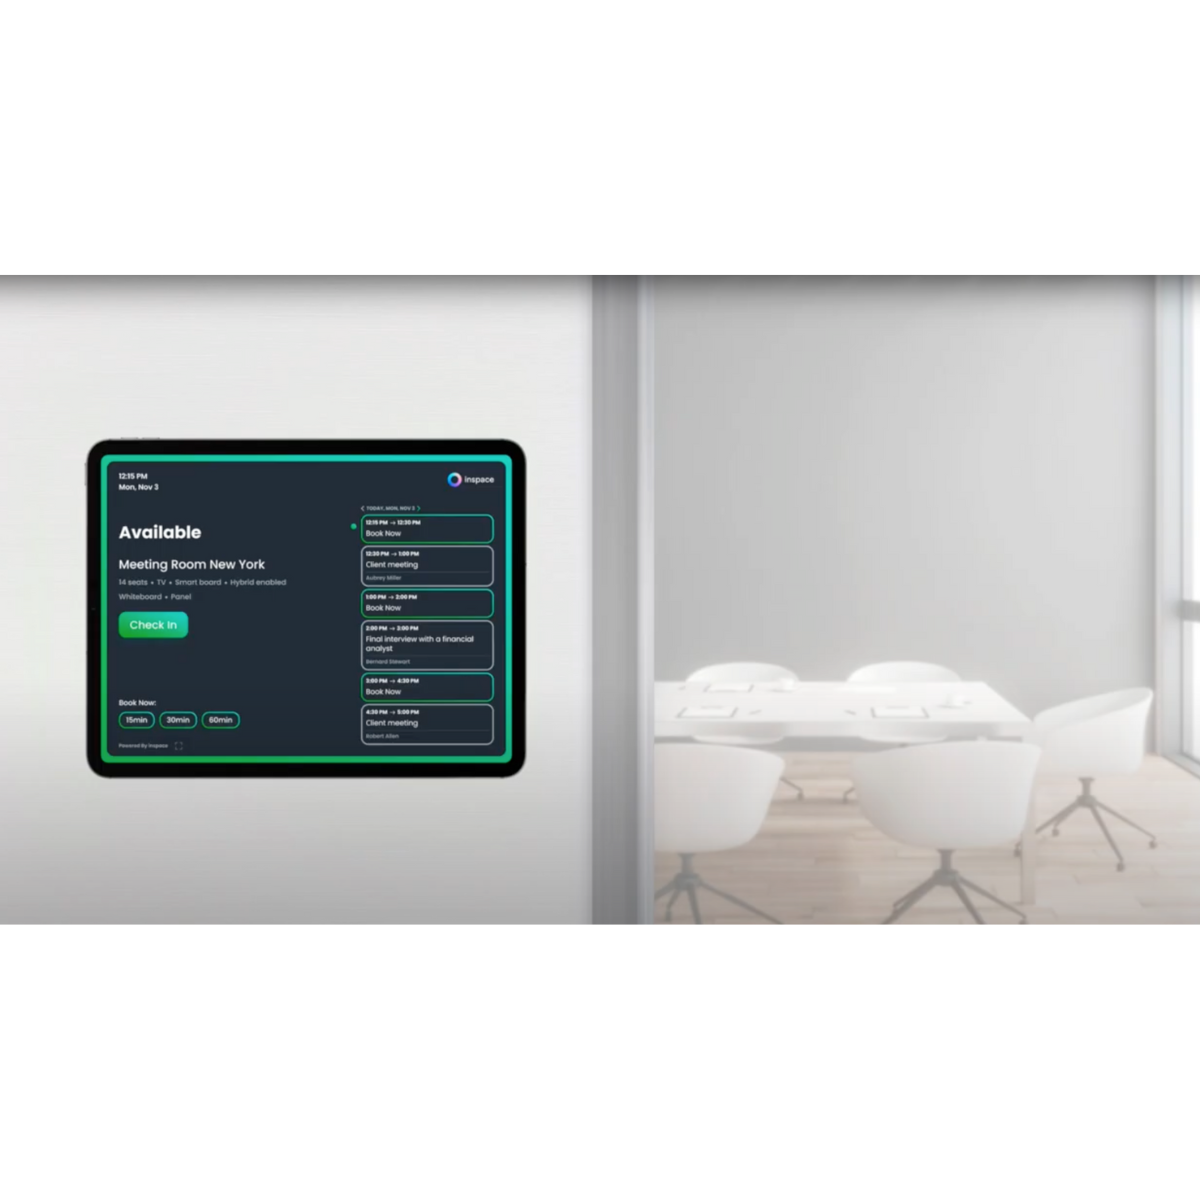 Hardware agnostic meeting room screen options give you the flexibility to use whatever hardware you prefer.  inspace does not require any hardware . Room booking can also be reserved in the inspace app or through any internet browser.